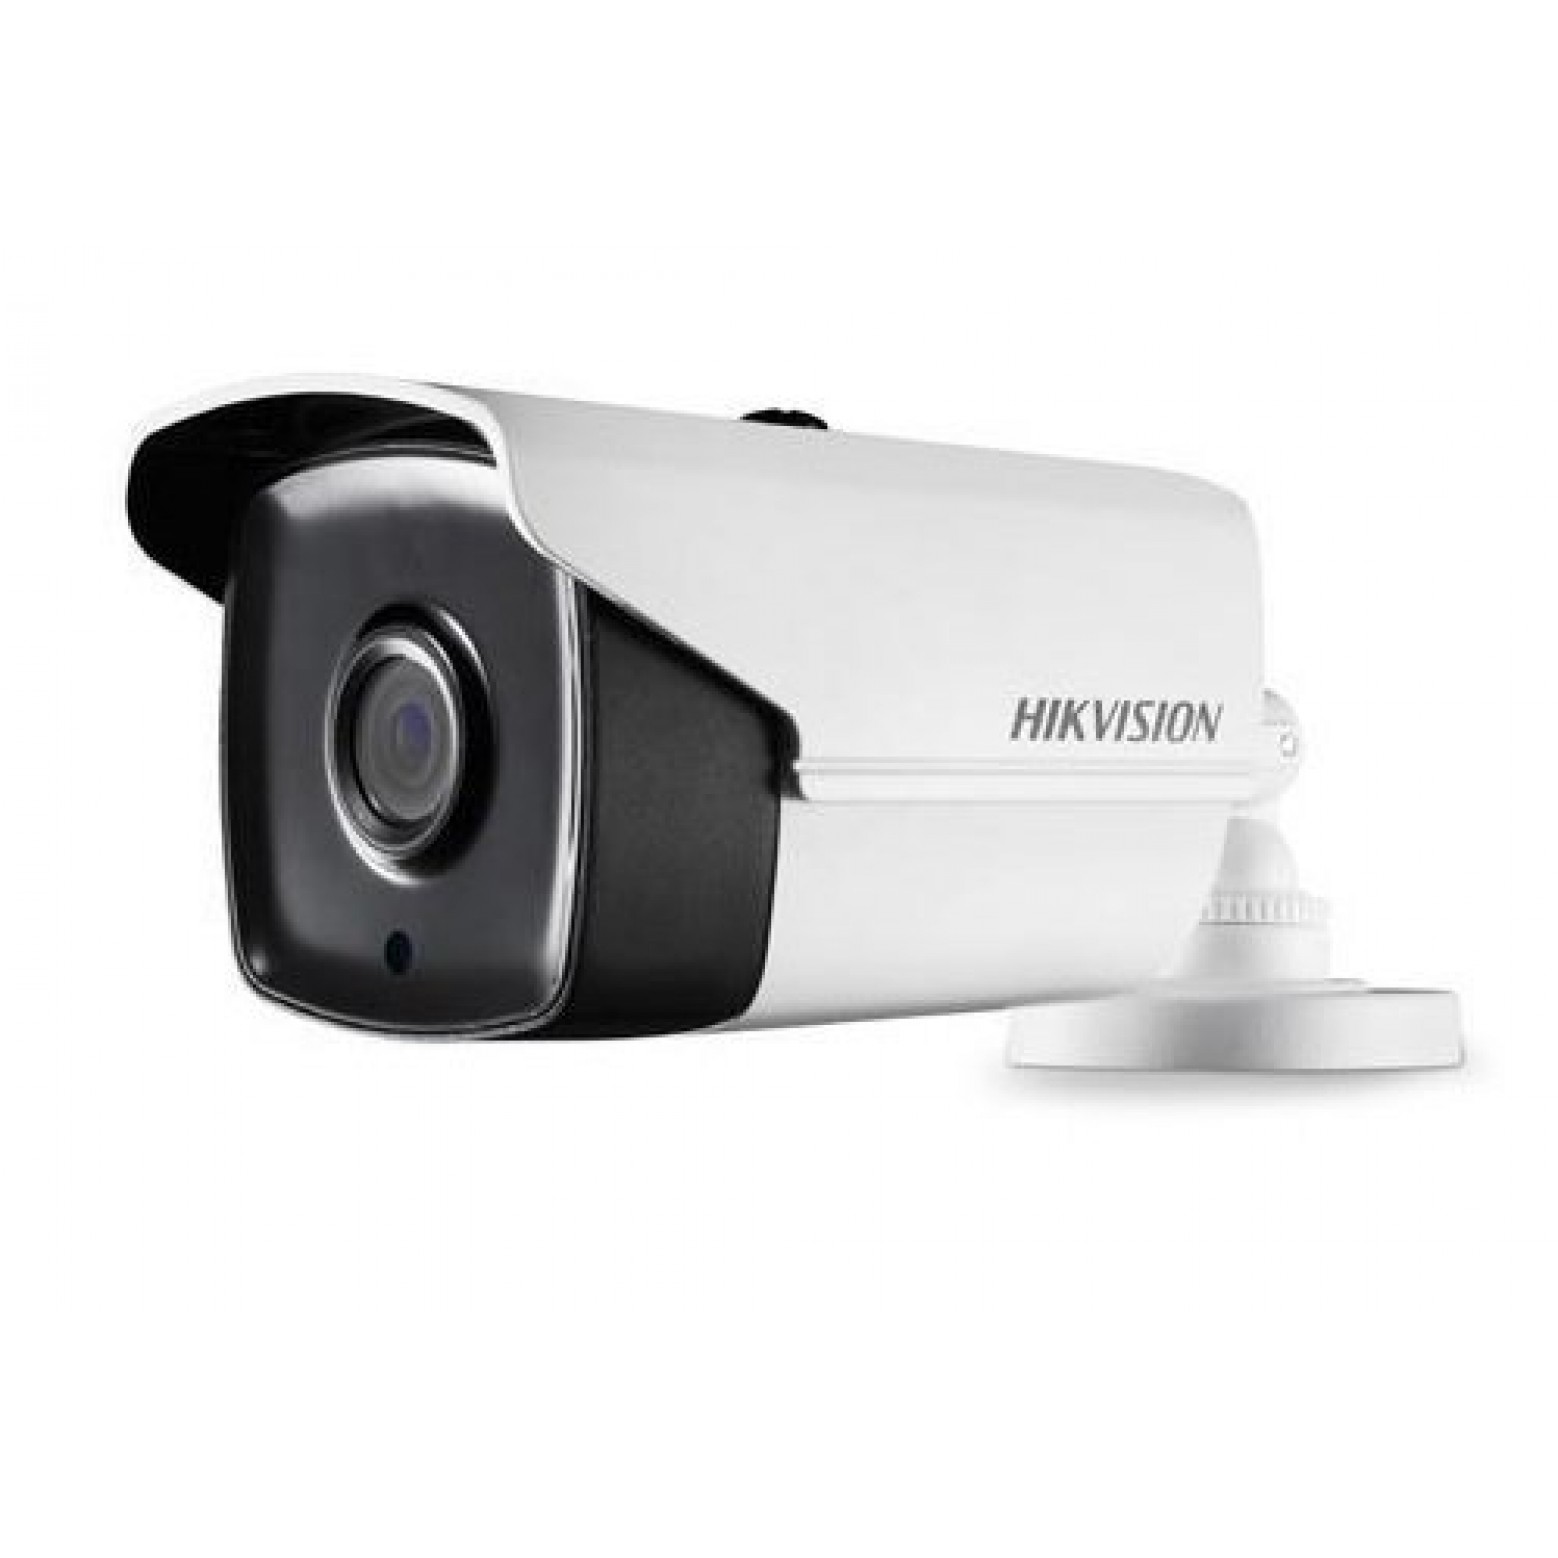 Hikvision DS-2CE16H1T-AIT3Z 5MP, 2,8~12mm motorzoom, EXIR 40m Turbo HD Bullet Camera